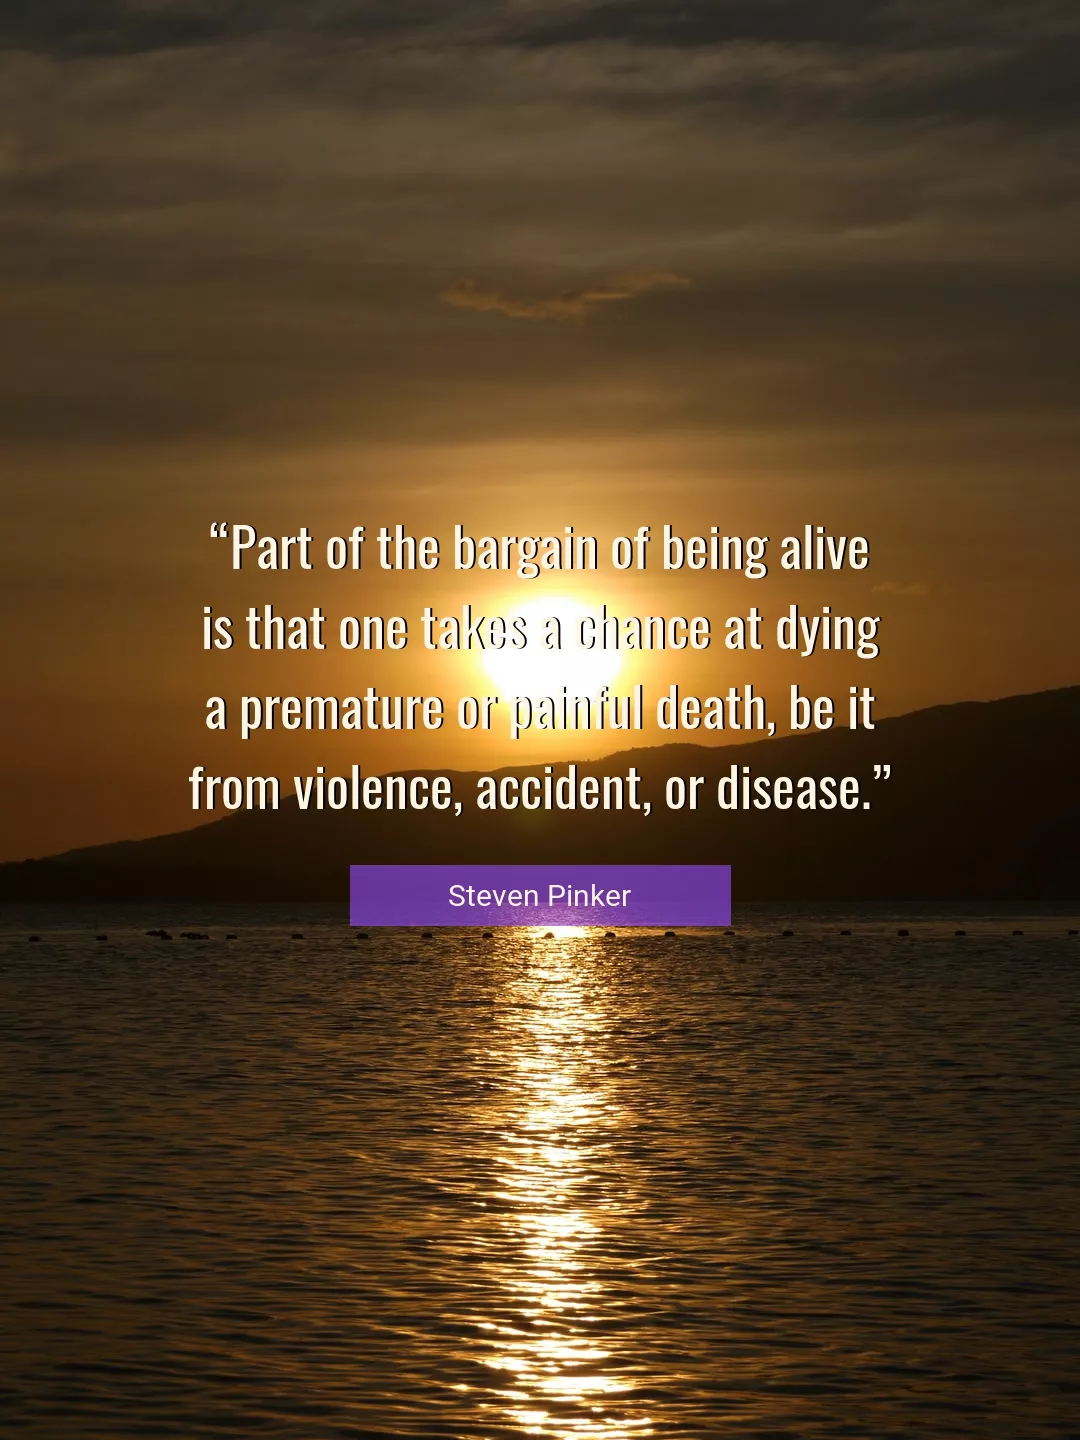 Quote About Death By Steven Pinker